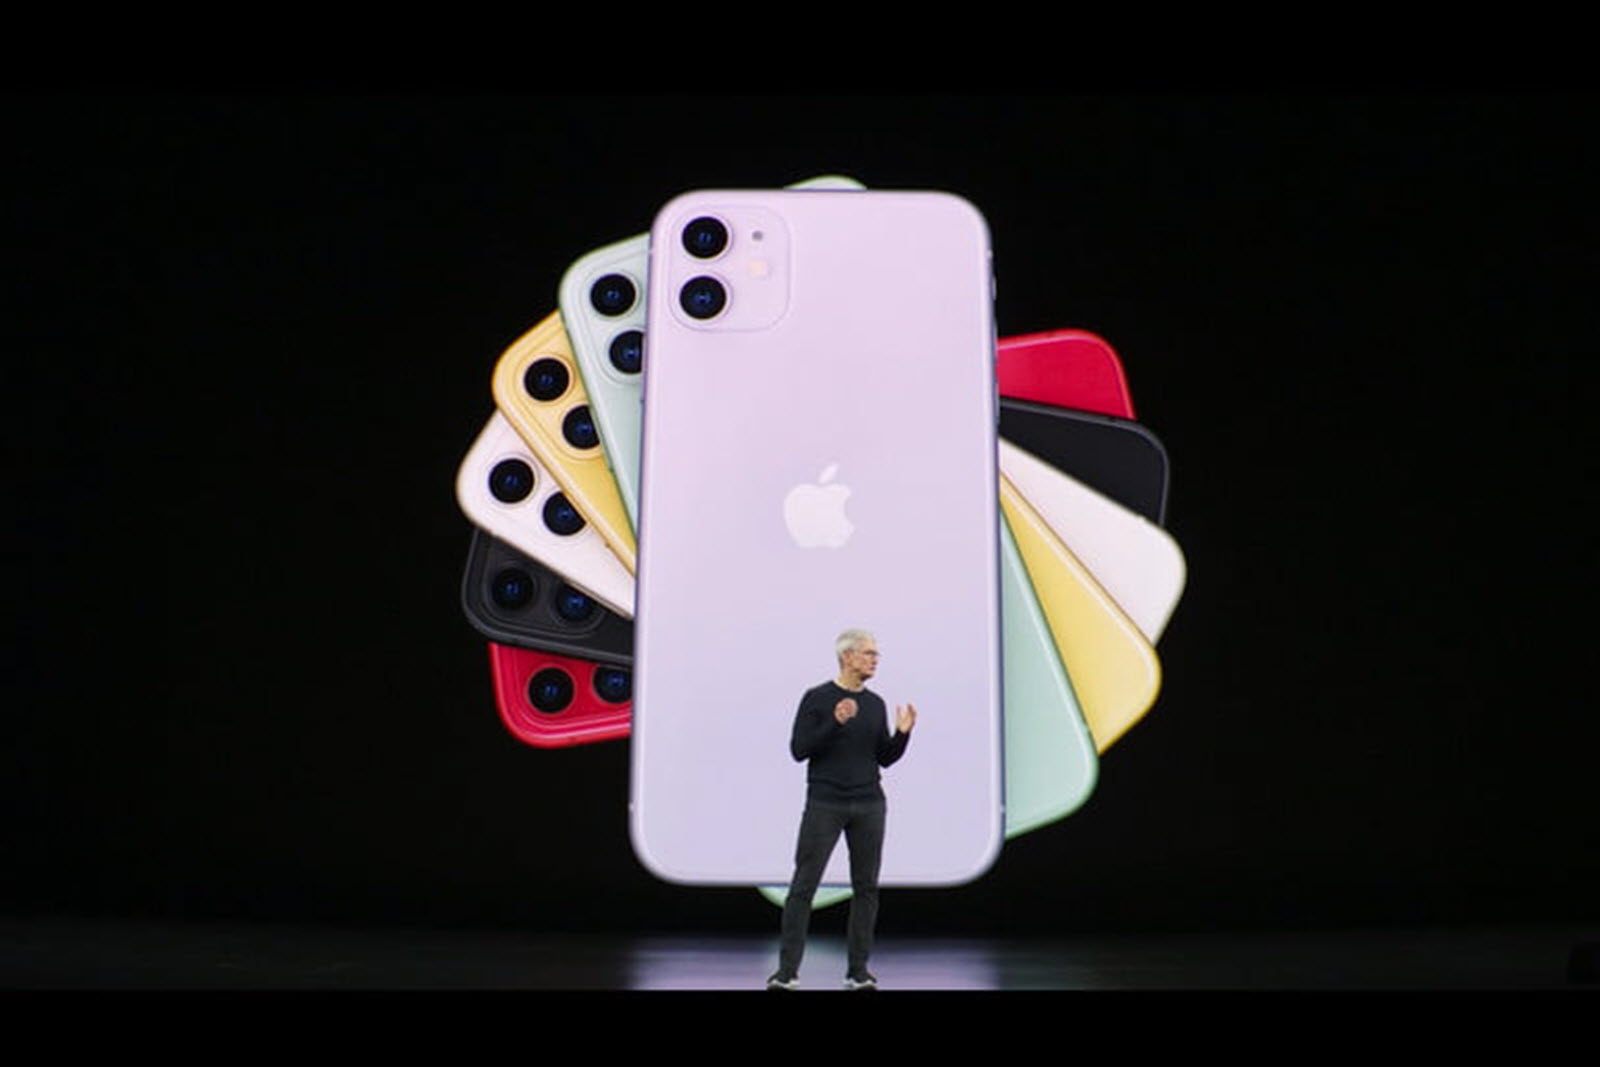 iphone 11 launch with no 5g support